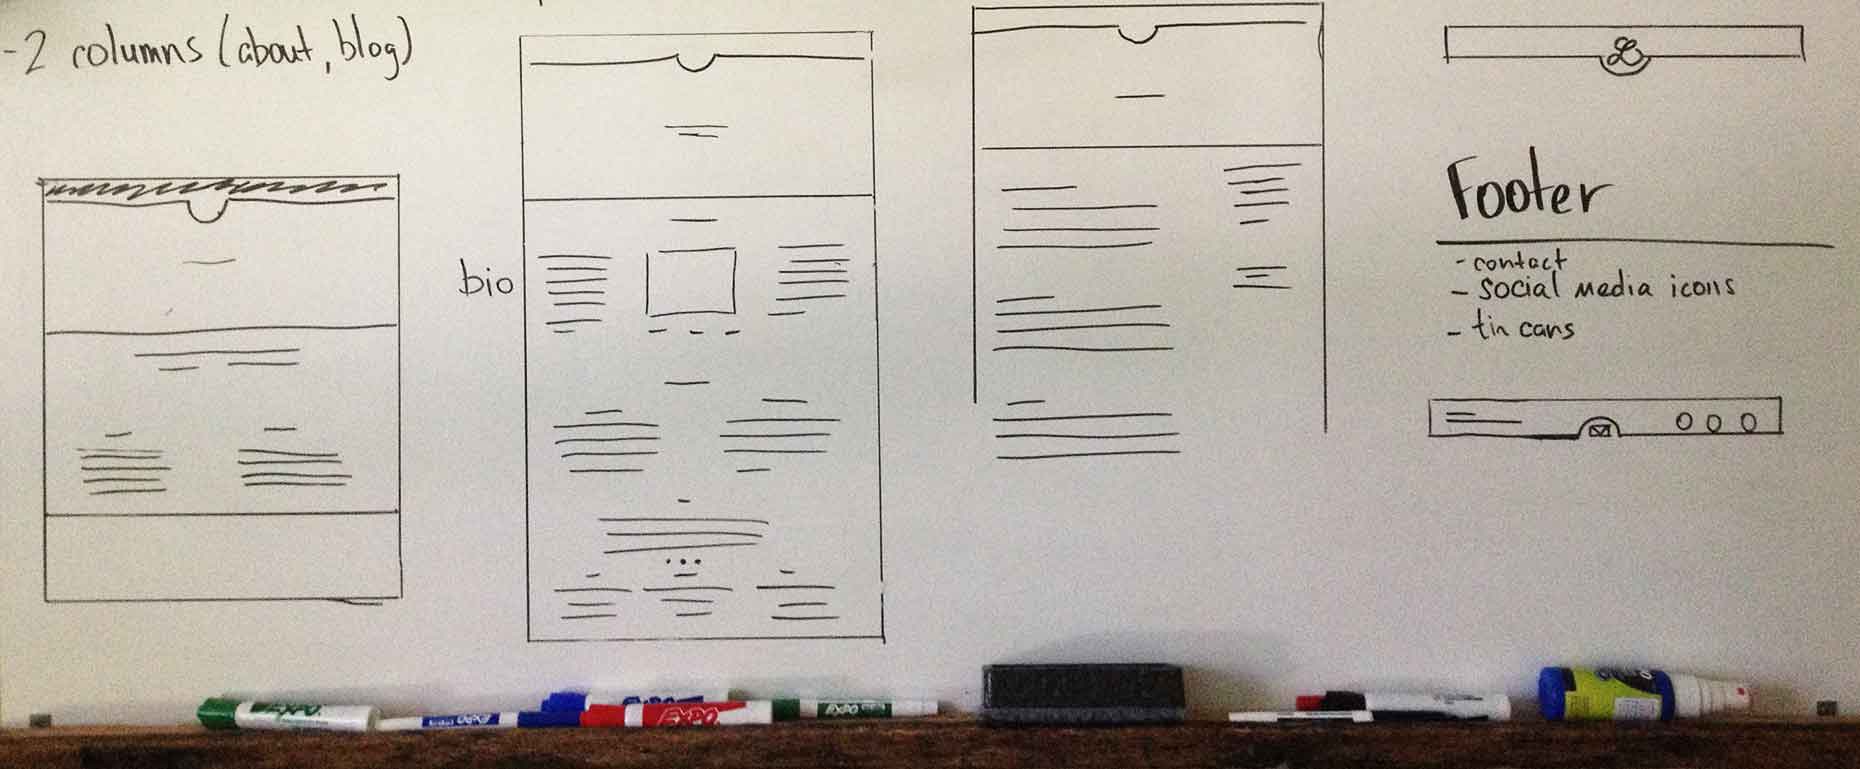 whiteboard-site-sketches